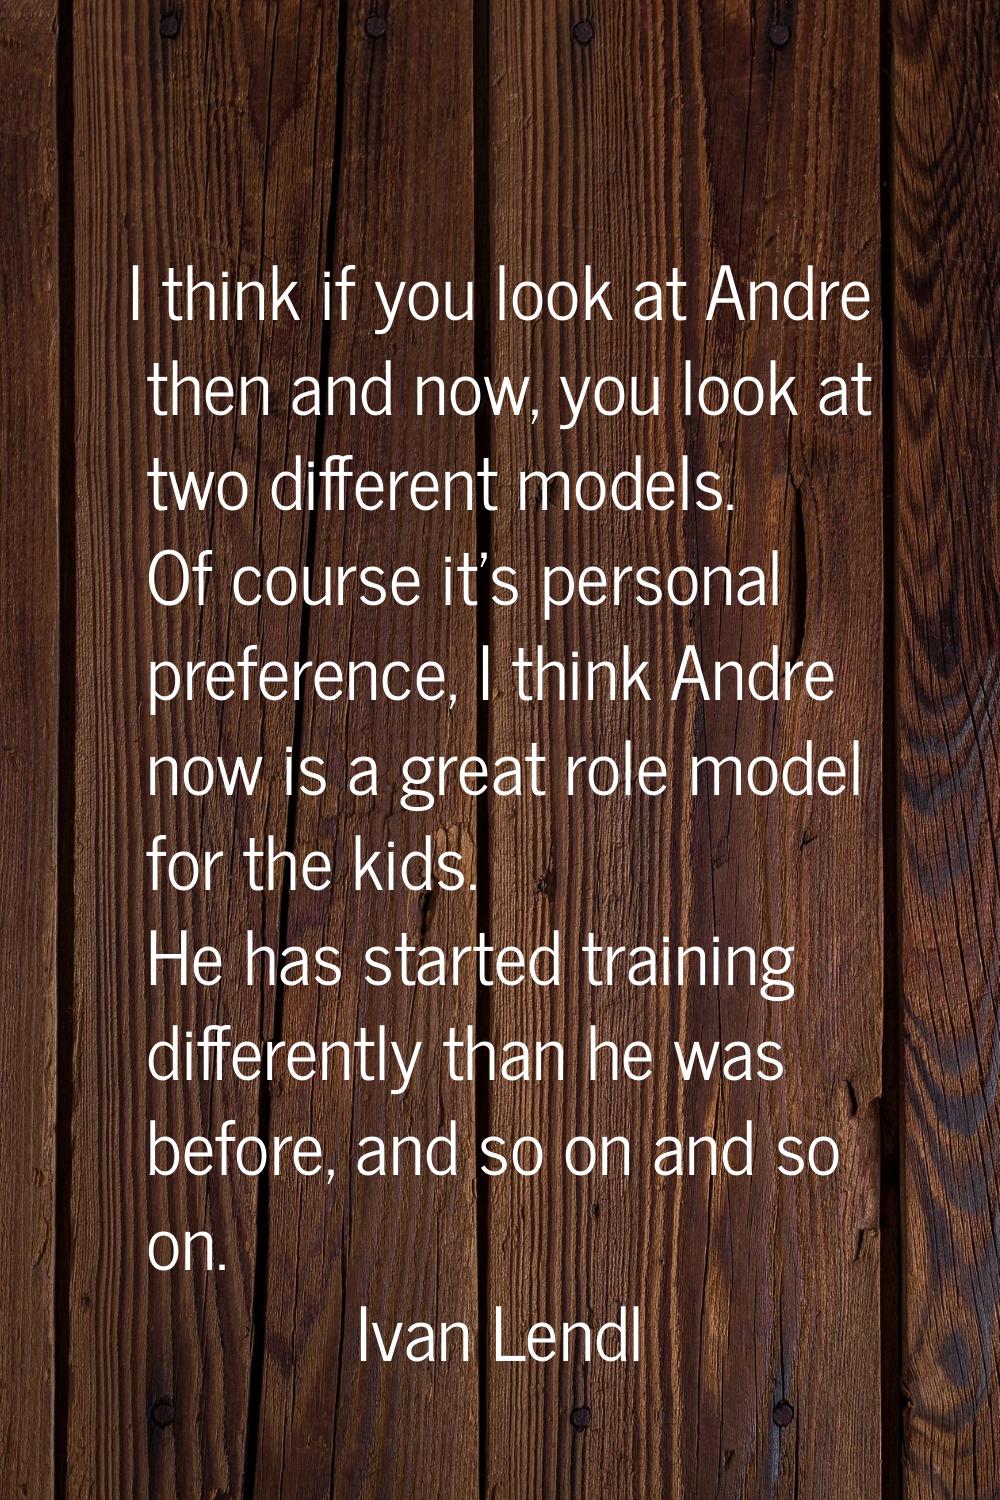 I think if you look at Andre then and now, you look at two different models. Of course it's persona